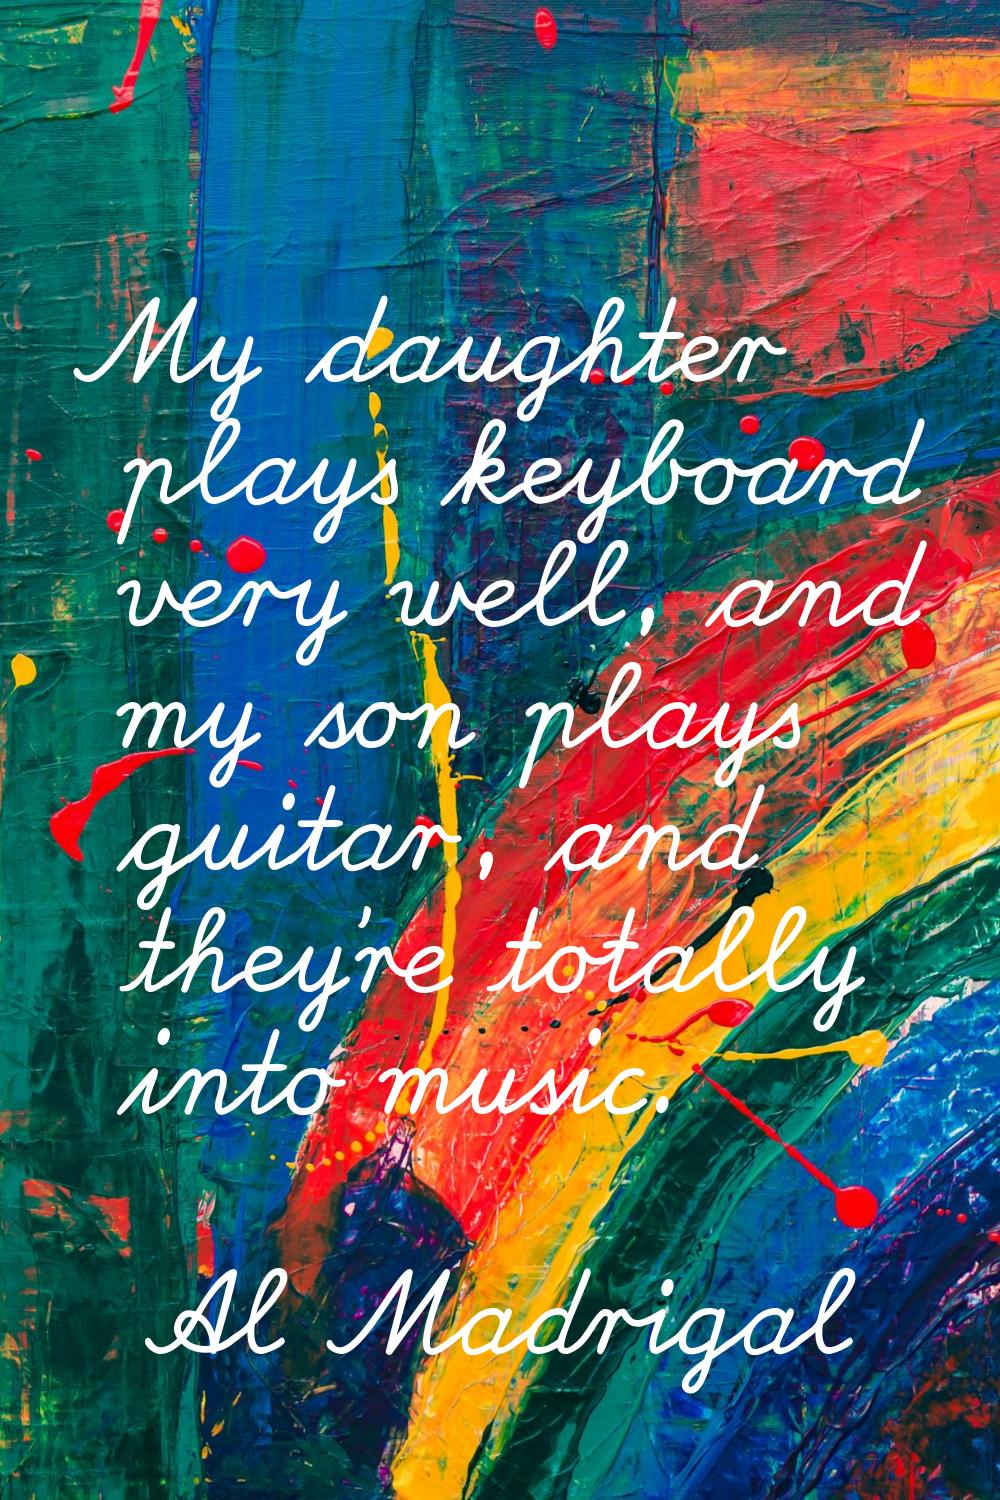 My daughter plays keyboard very well, and my son plays guitar, and they're totally into music.